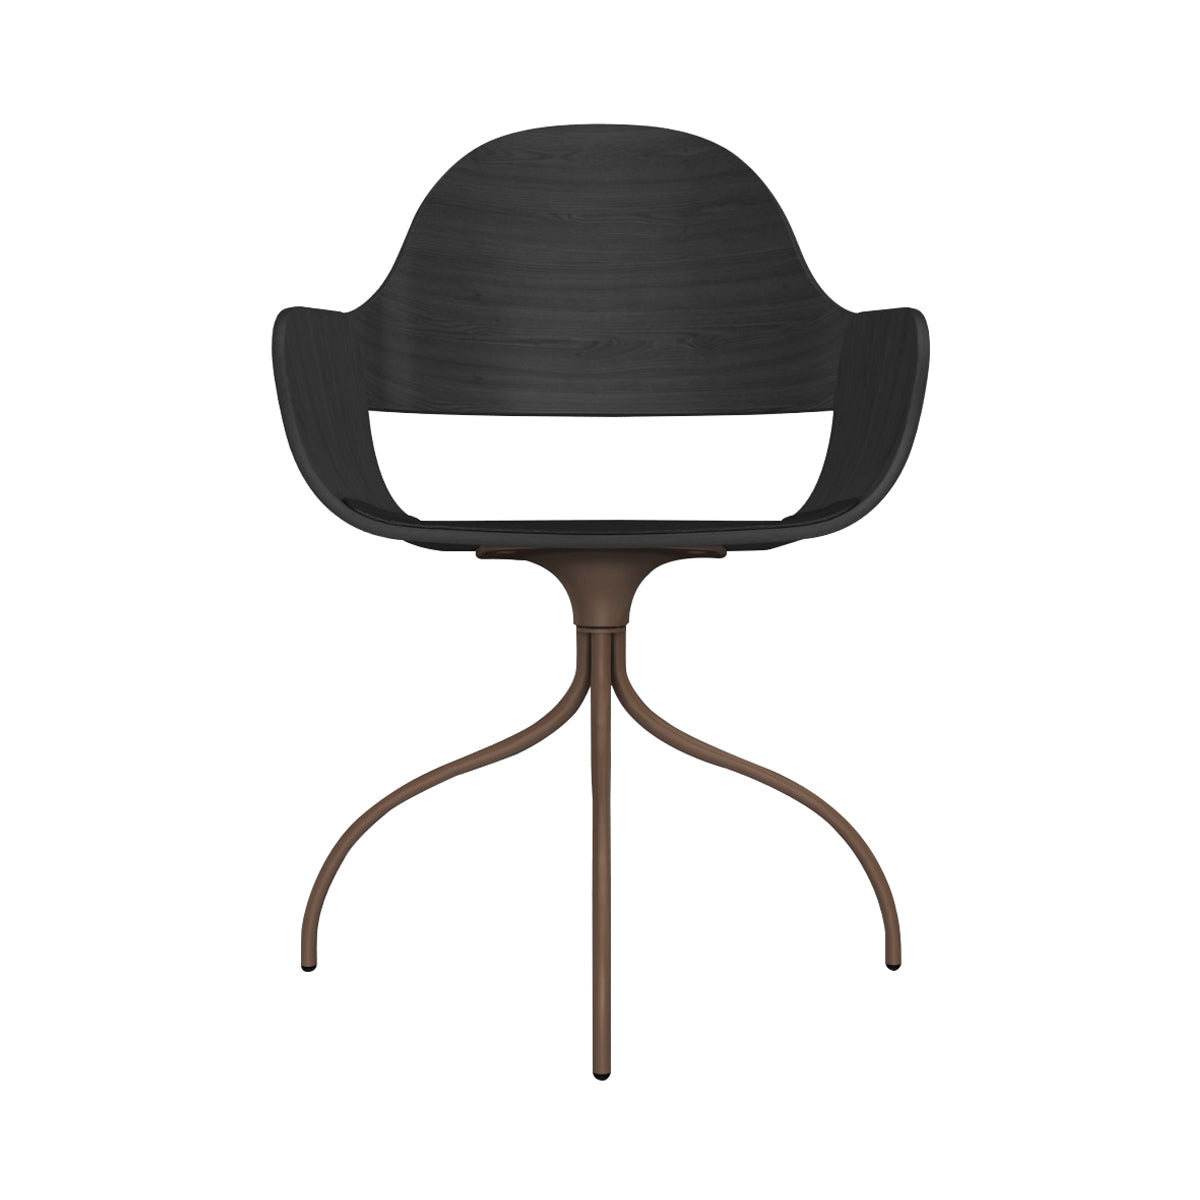 Showtime Nude Chair with Swivel Base: Seat Upholstered + Ash Stained Black + Pale Brown